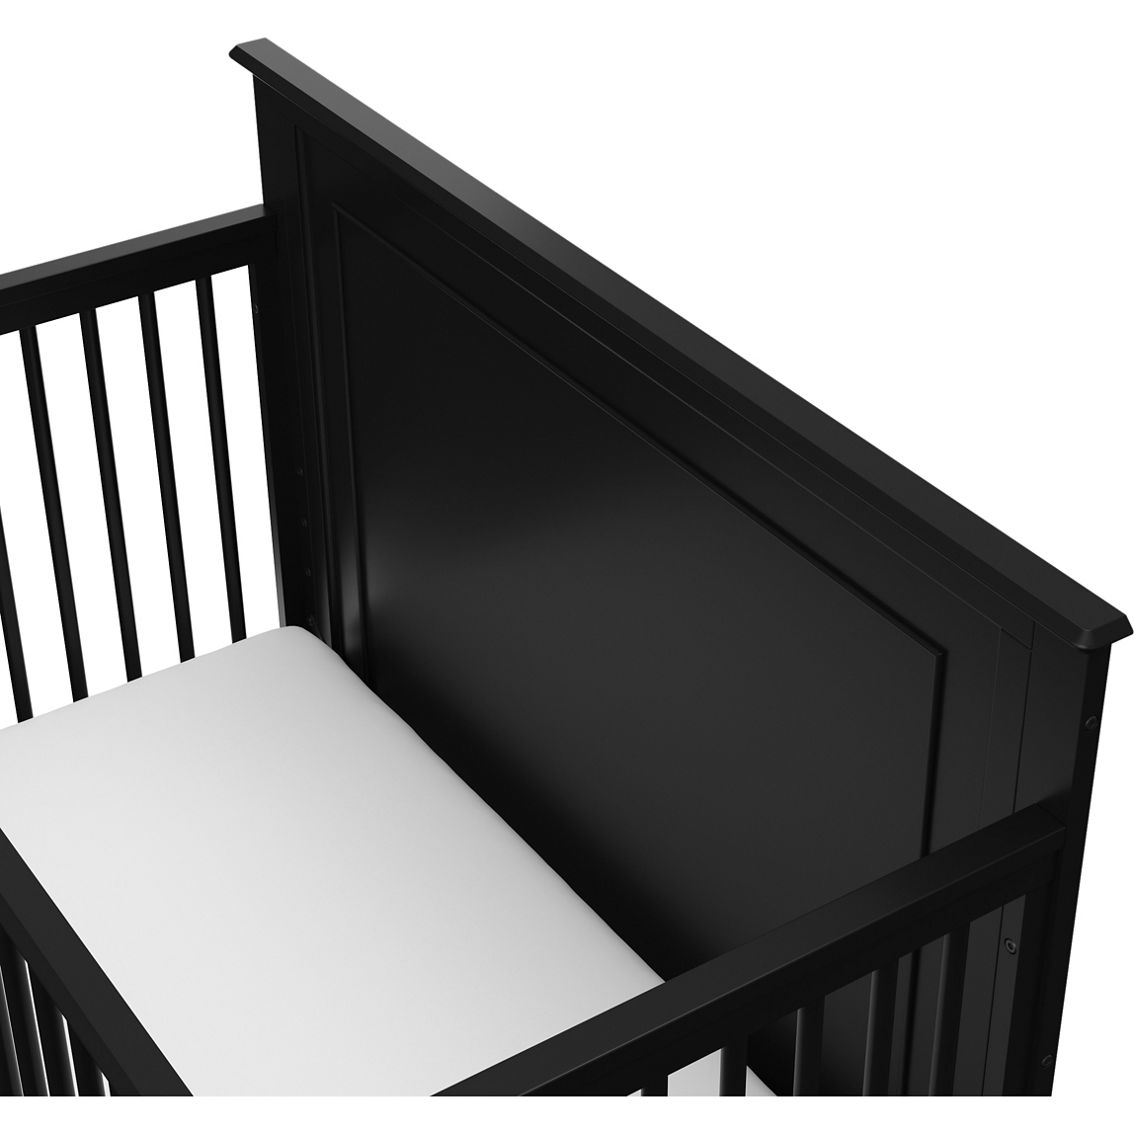 Storkcraft Solstice 5-in-1 Convertible Crib - Image 6 of 8